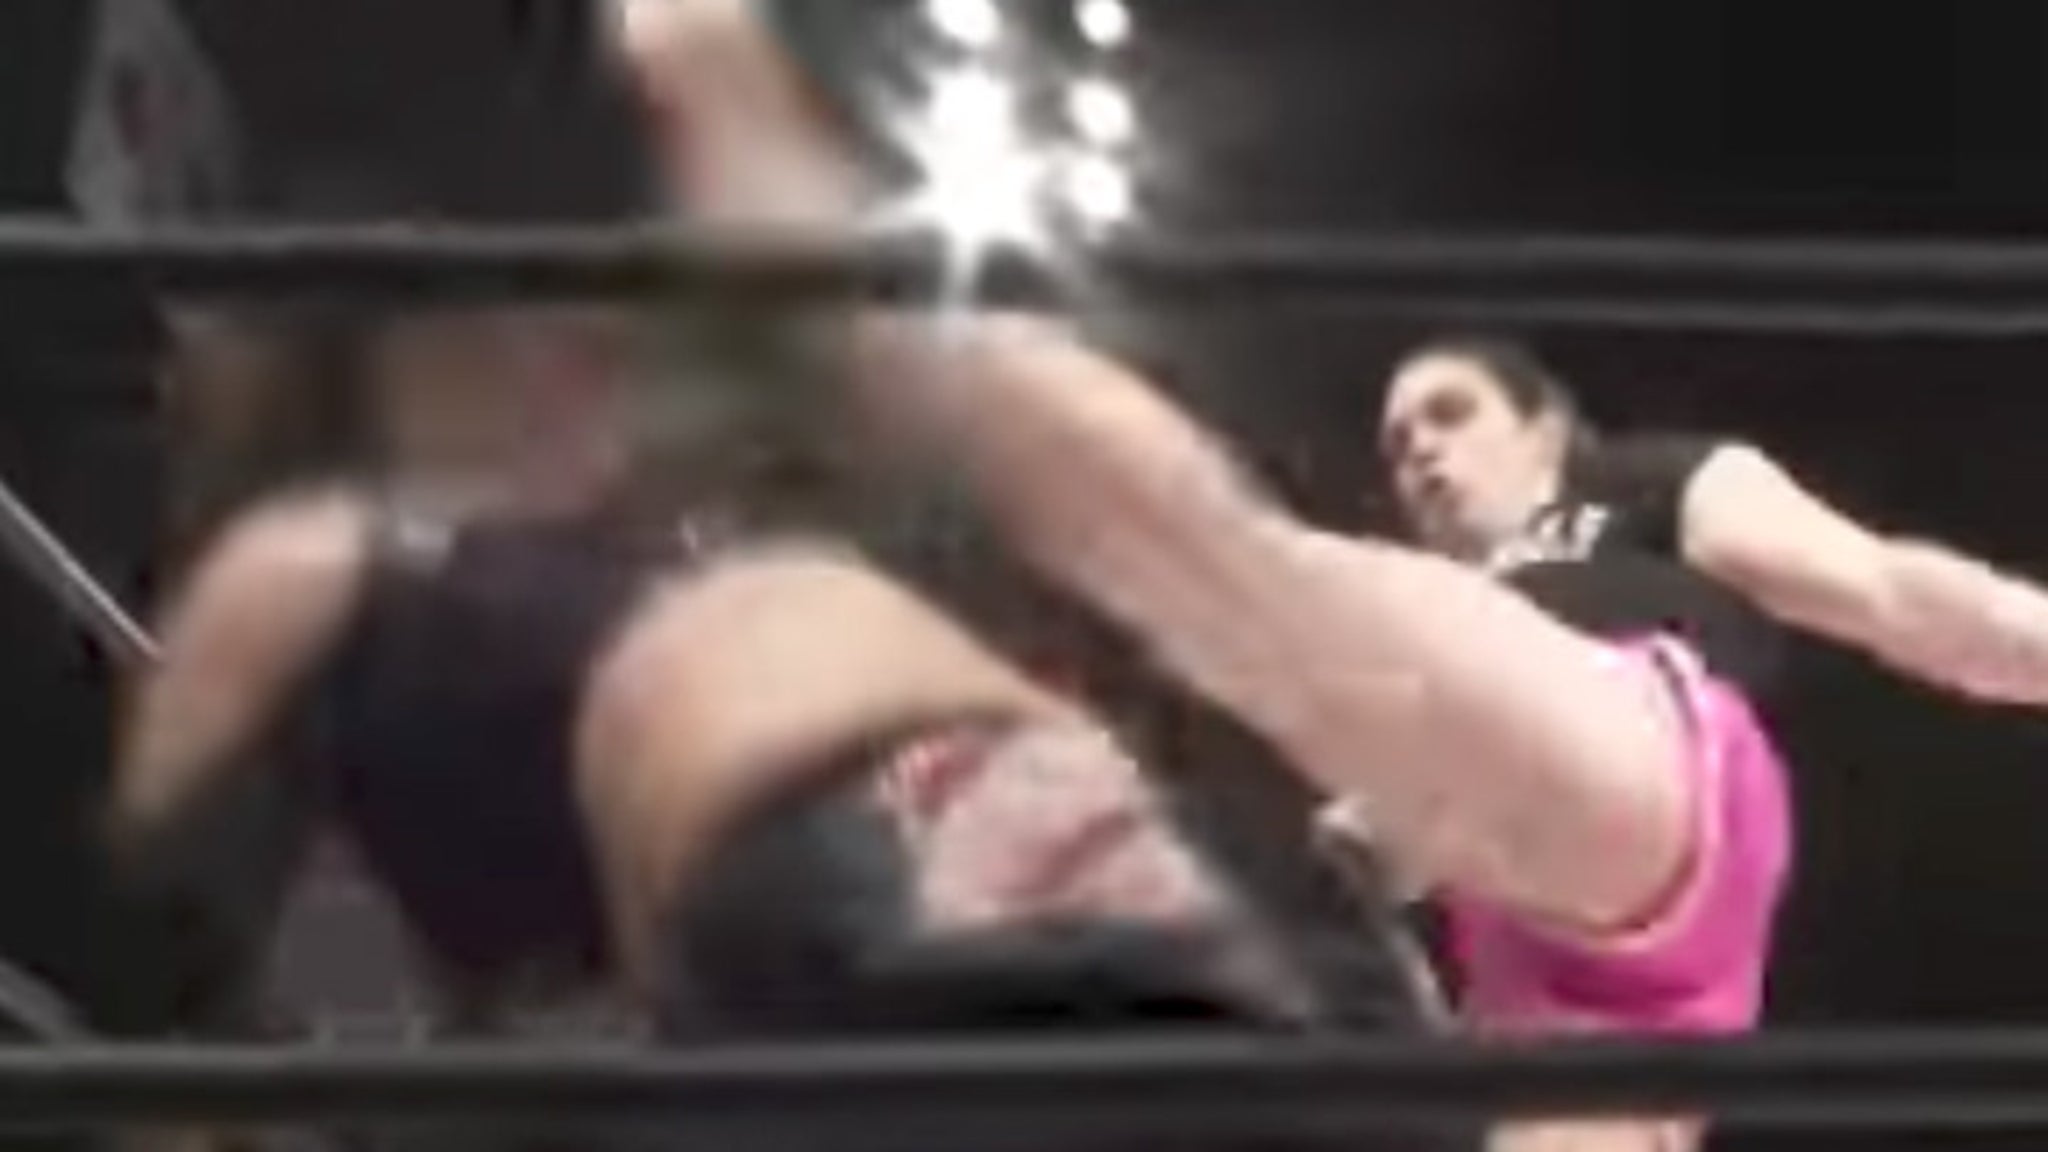 MMA's Gabi Garcia Bashes Tiny Old Lady's Skull with Illegal Head-...